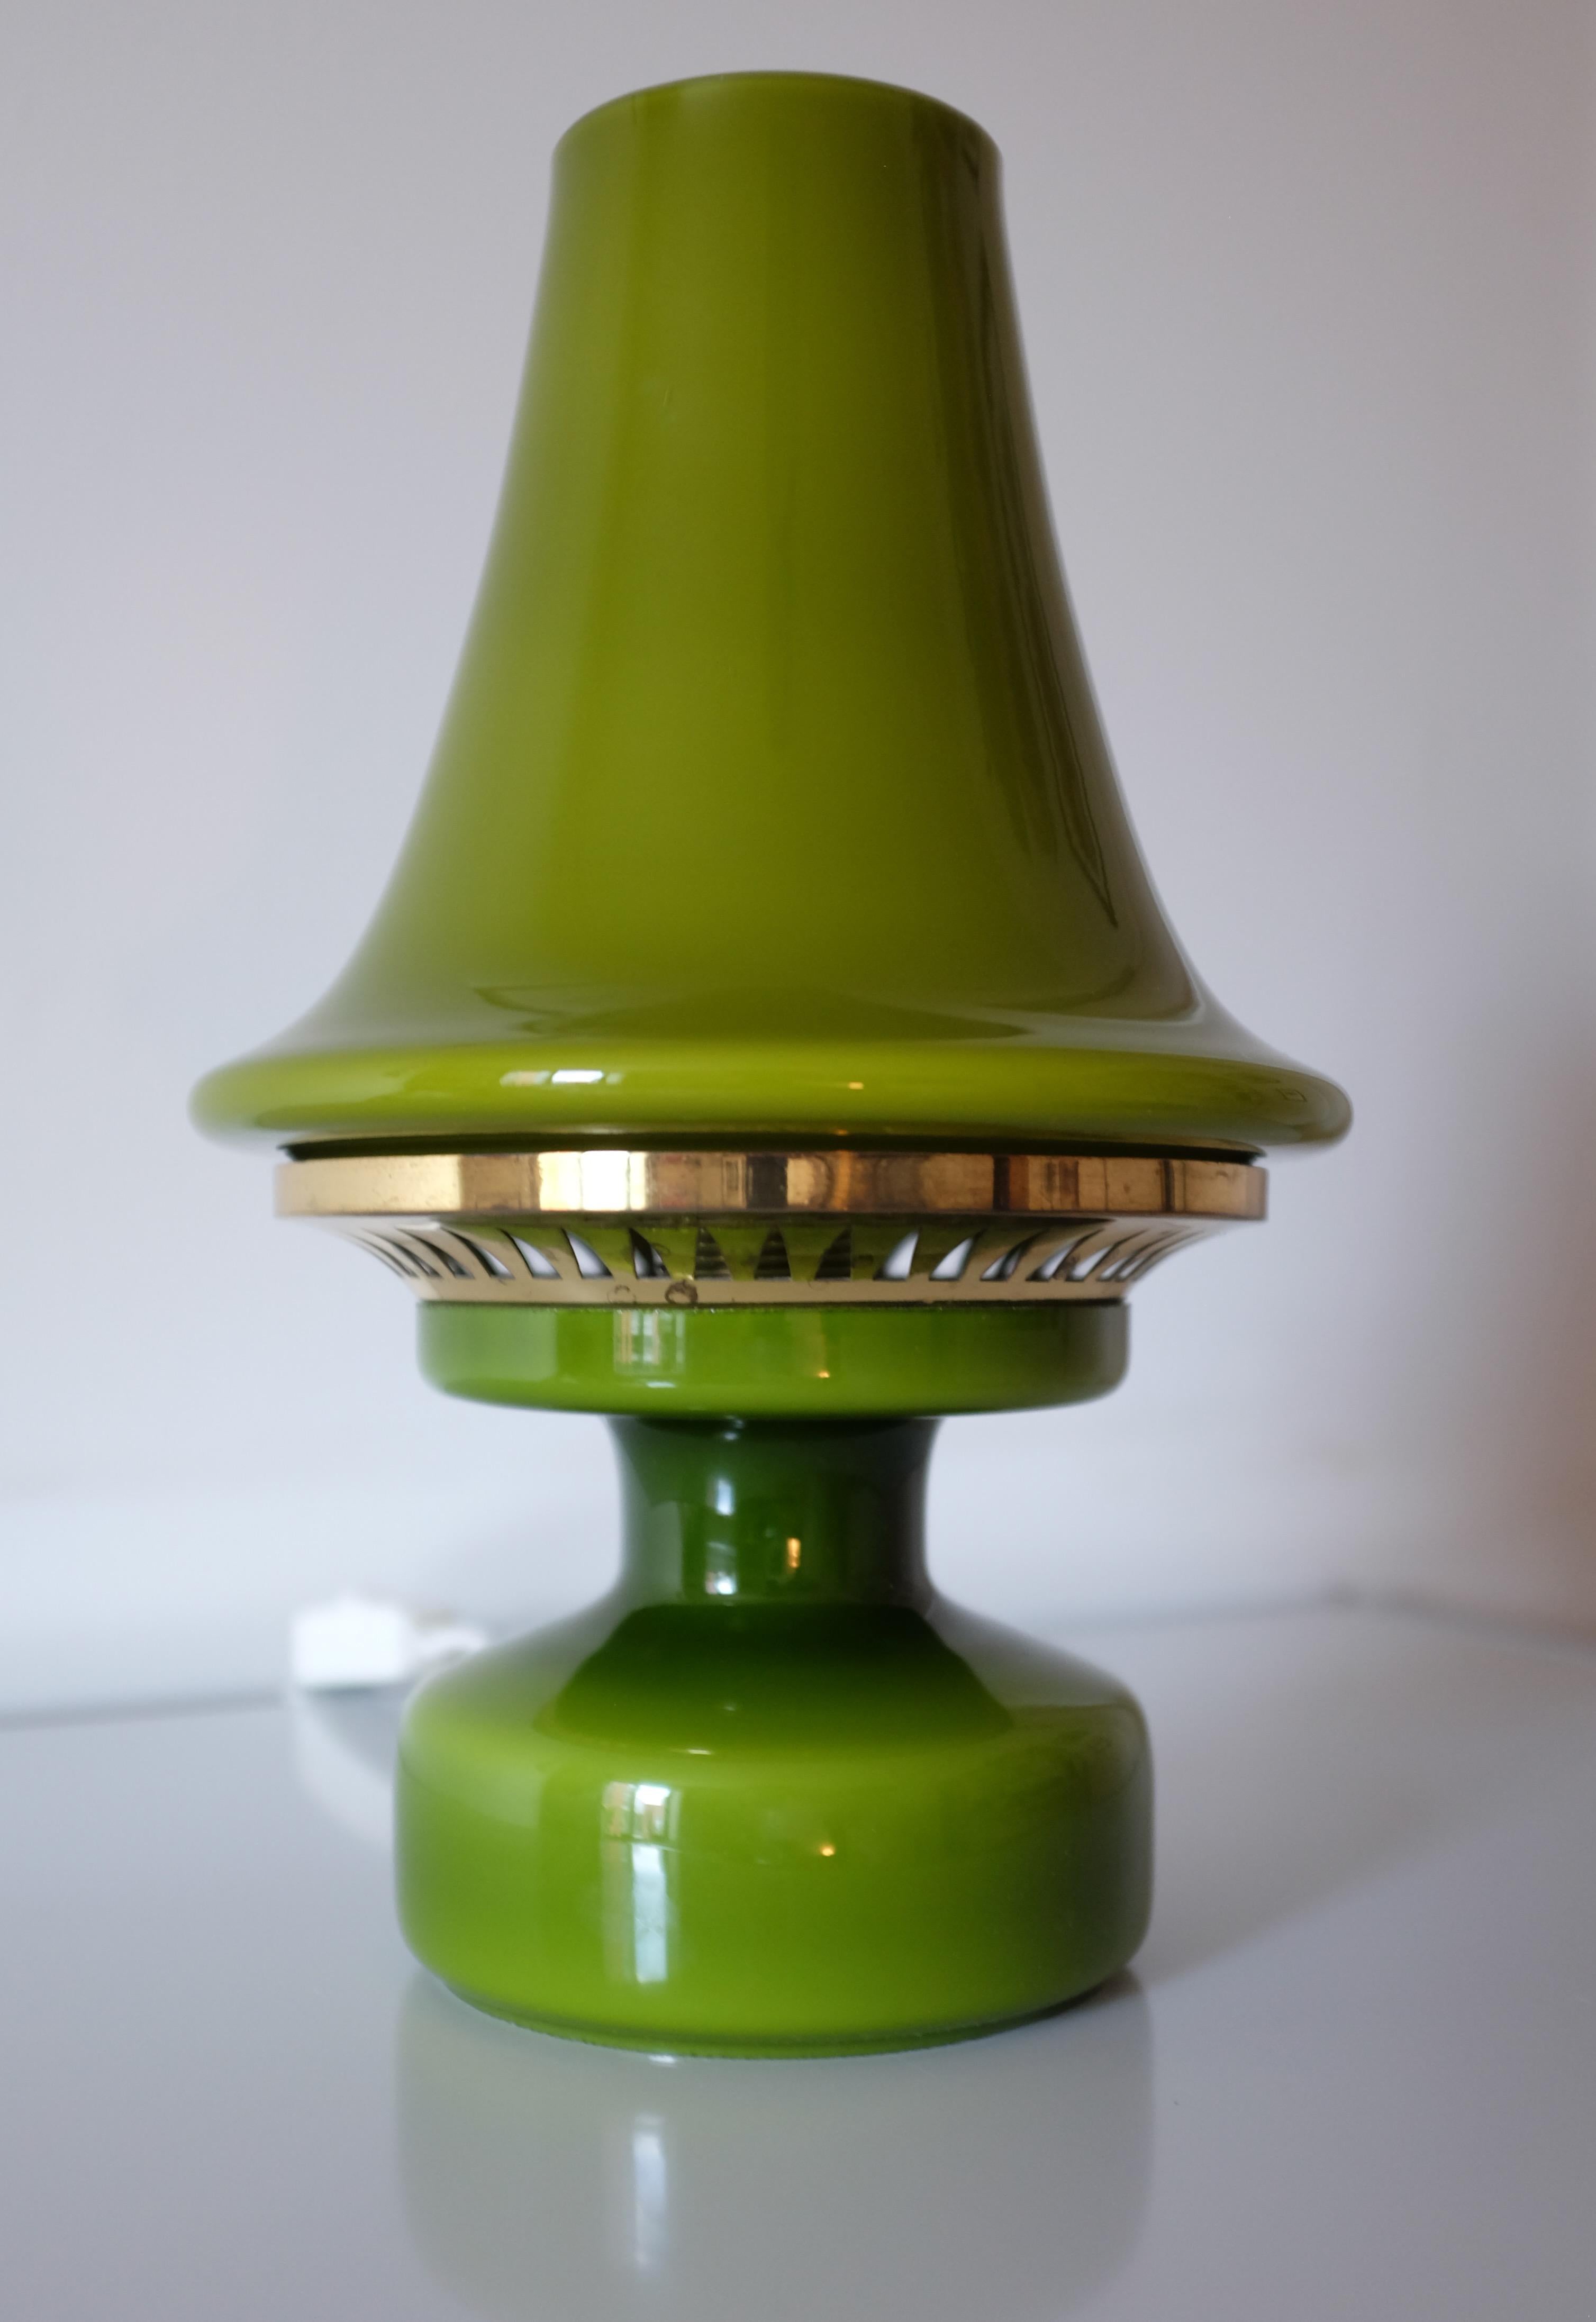 Impressive green opaline glass and brass table light by Hans-Agne Jakobsson for AB Markaryd. Round glass base with a brass accent in a graphic pattern topped with a cone shaped glass shade. All in the same dark lime colored opaline glass. A great